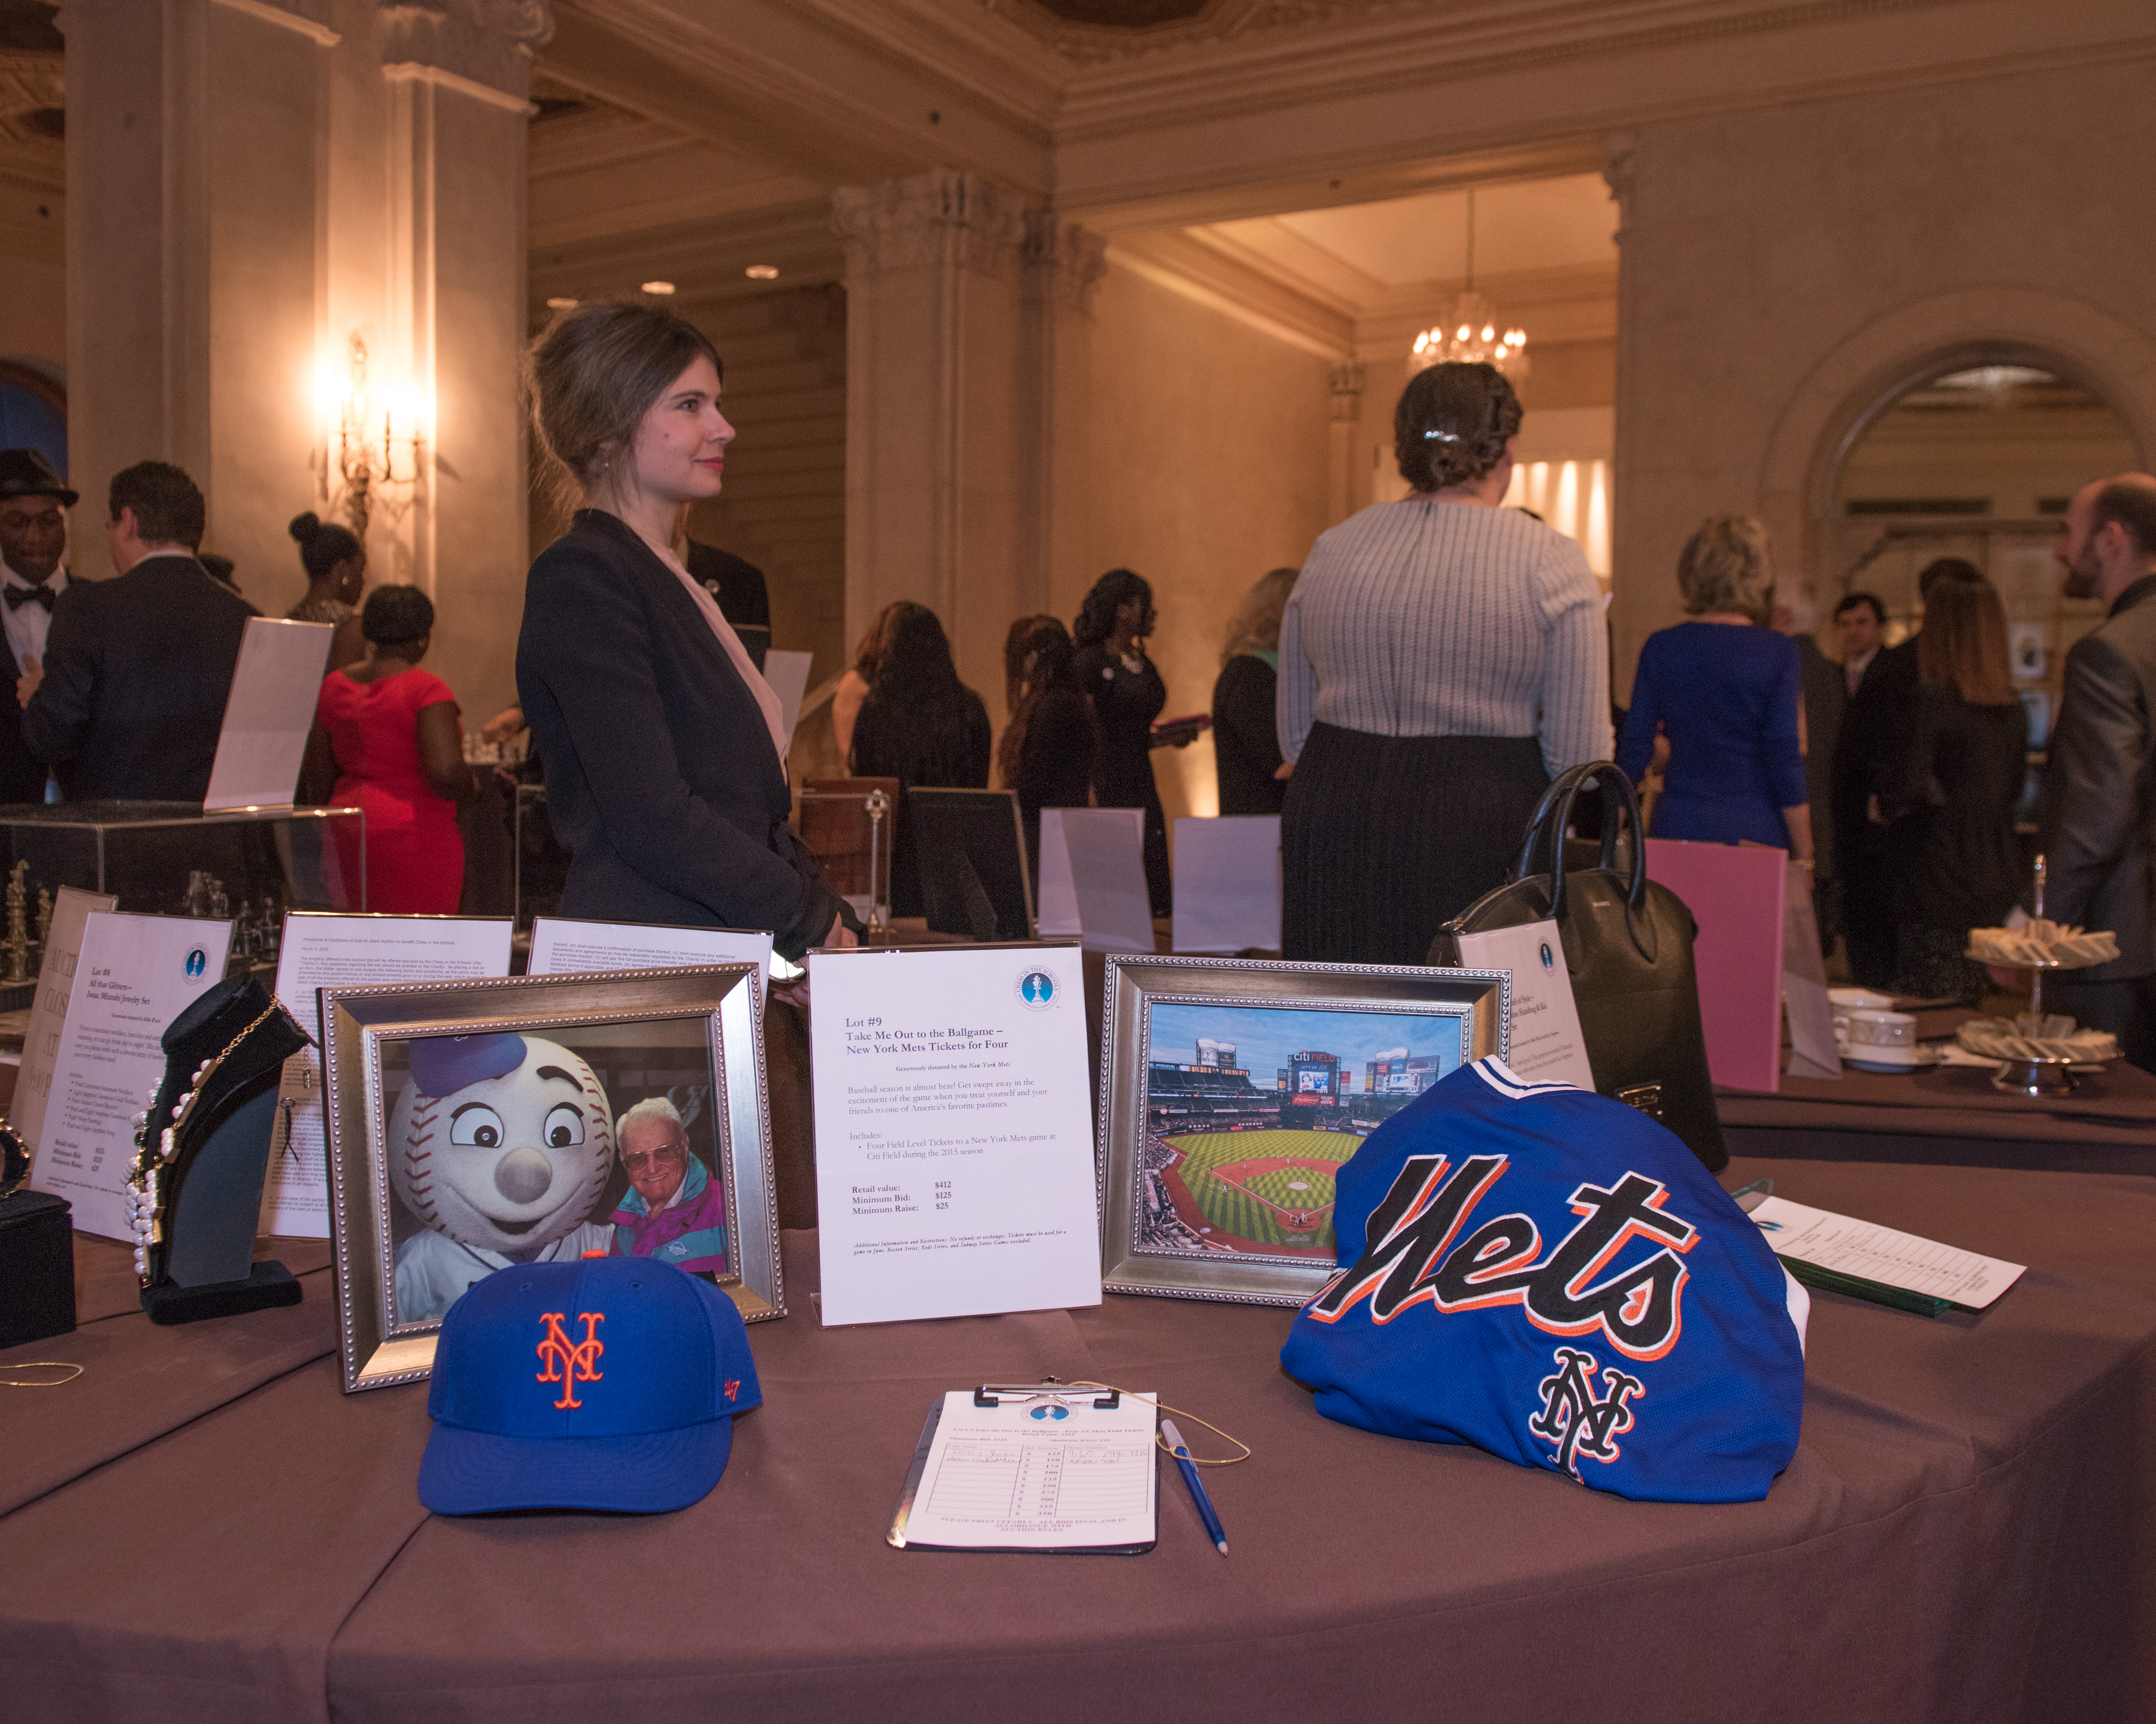 One of our fabulous auction displays, tickets to see the Mets!